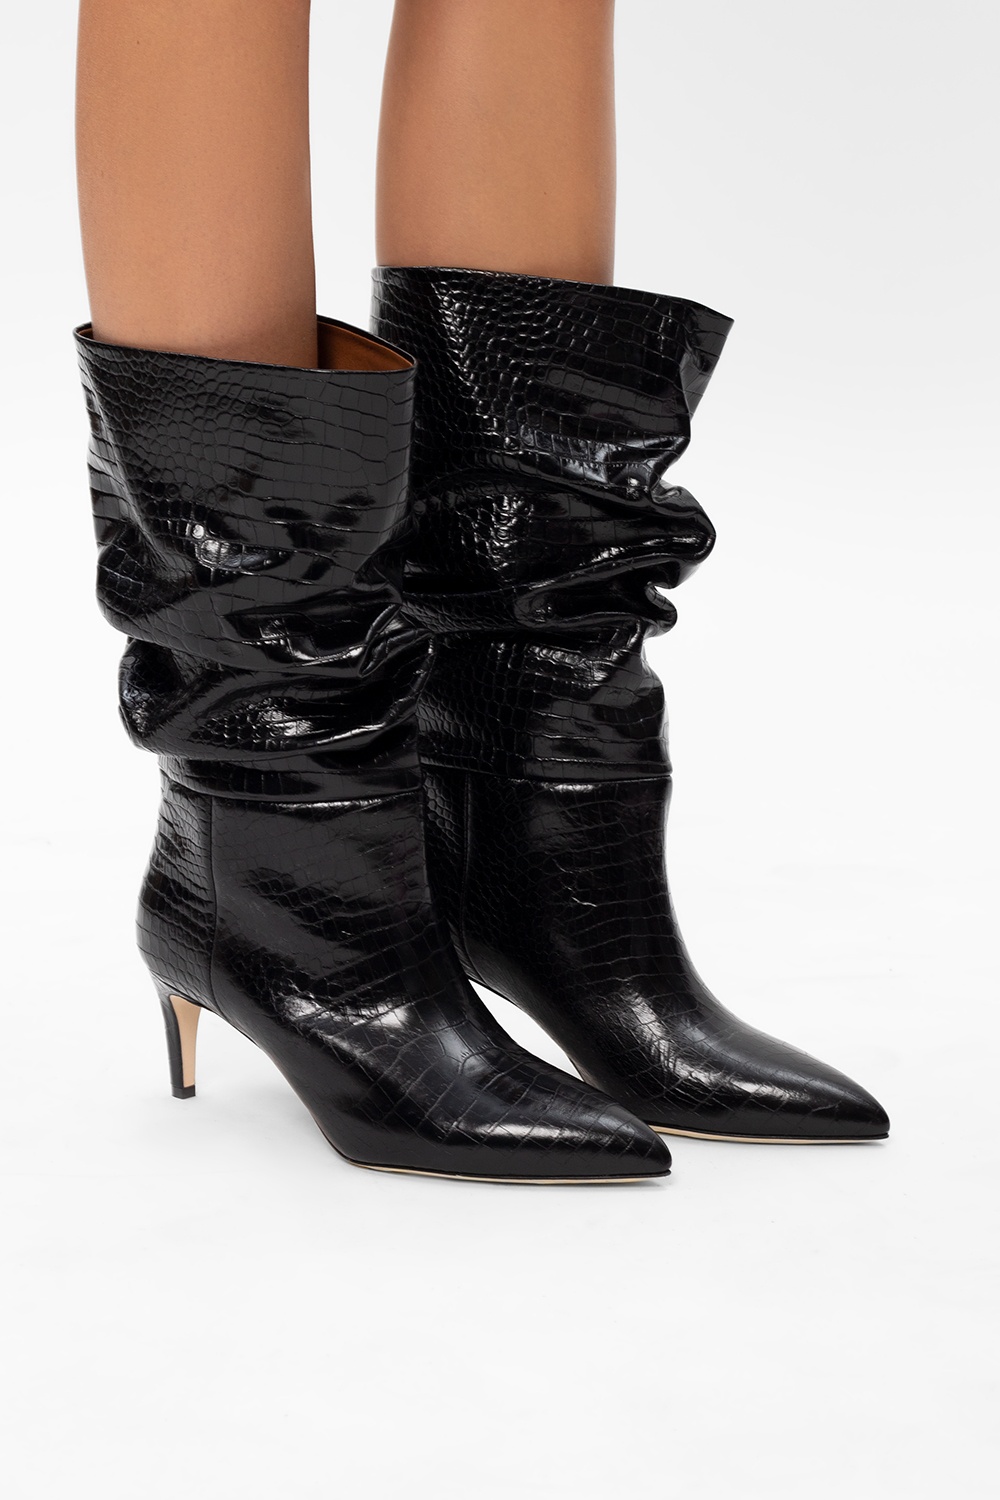 Paris Texas slouchy leather boots